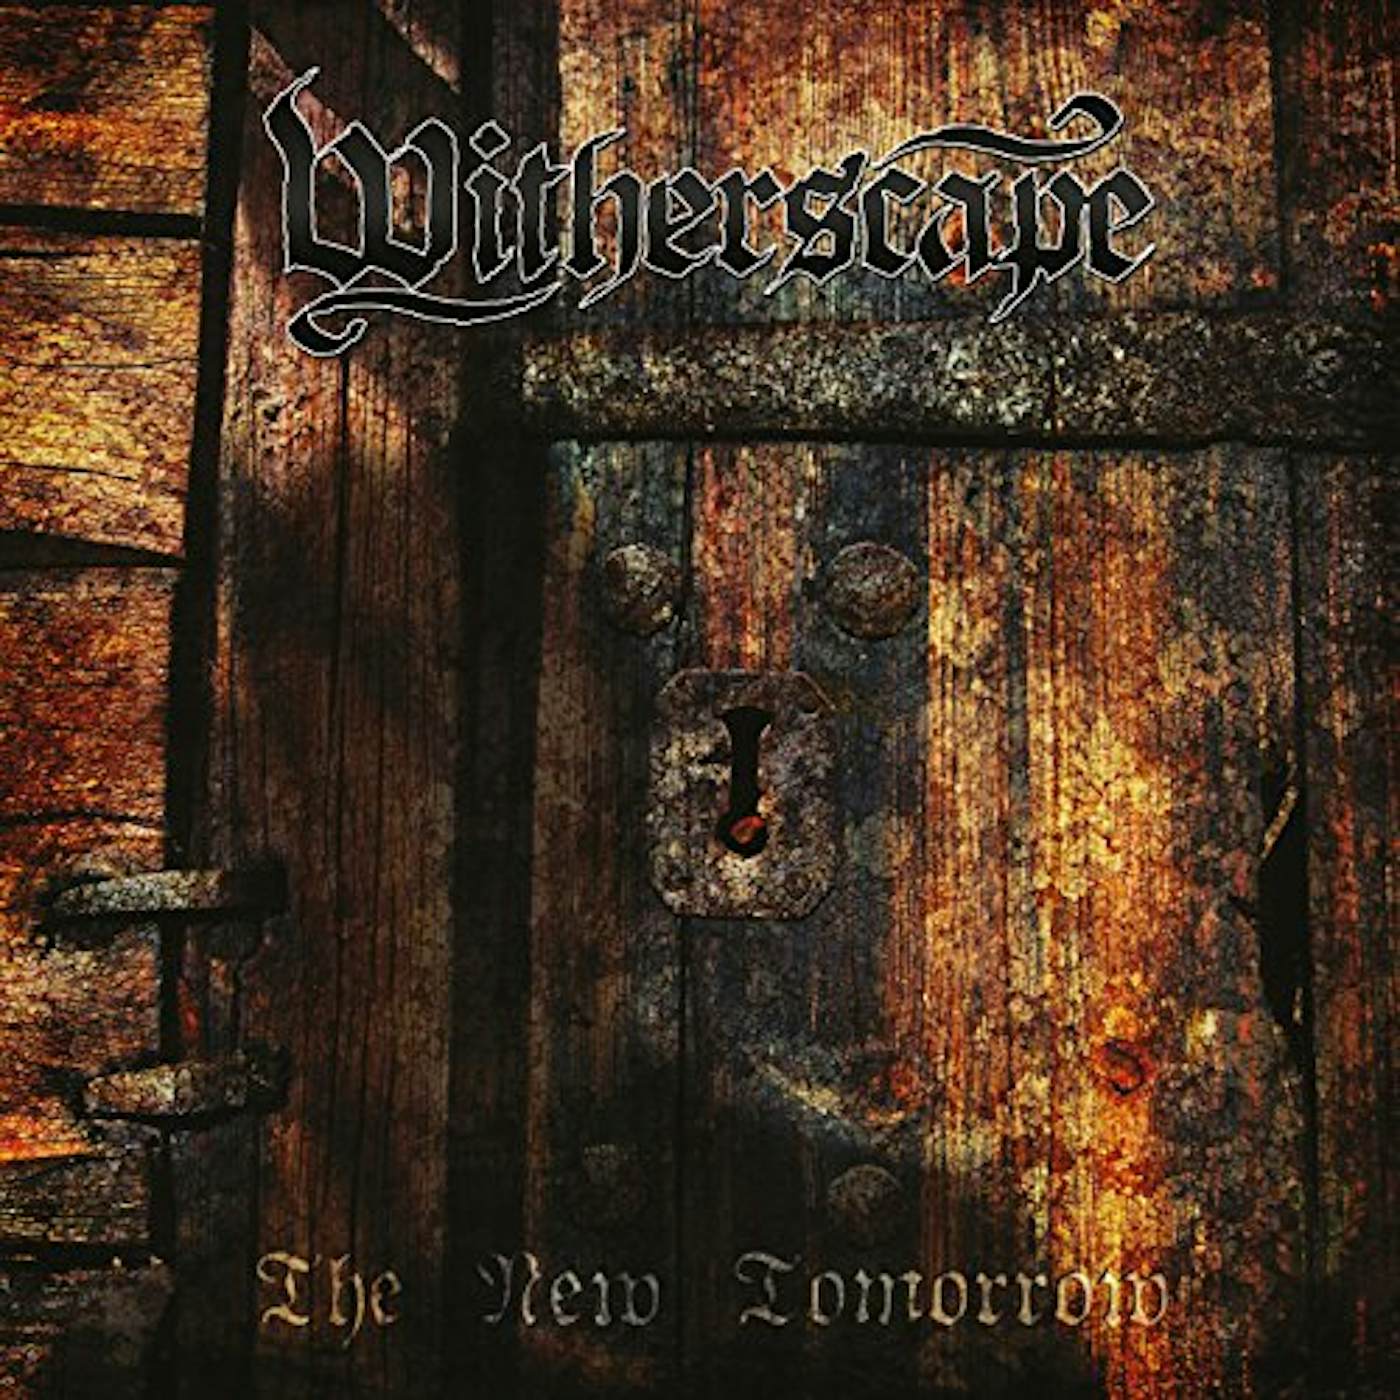 Witherscape NEW TOMORROW (RED VINYL)  (EP)  (GER) Vinyl Record - Colored Vinyl, Red Vinyl